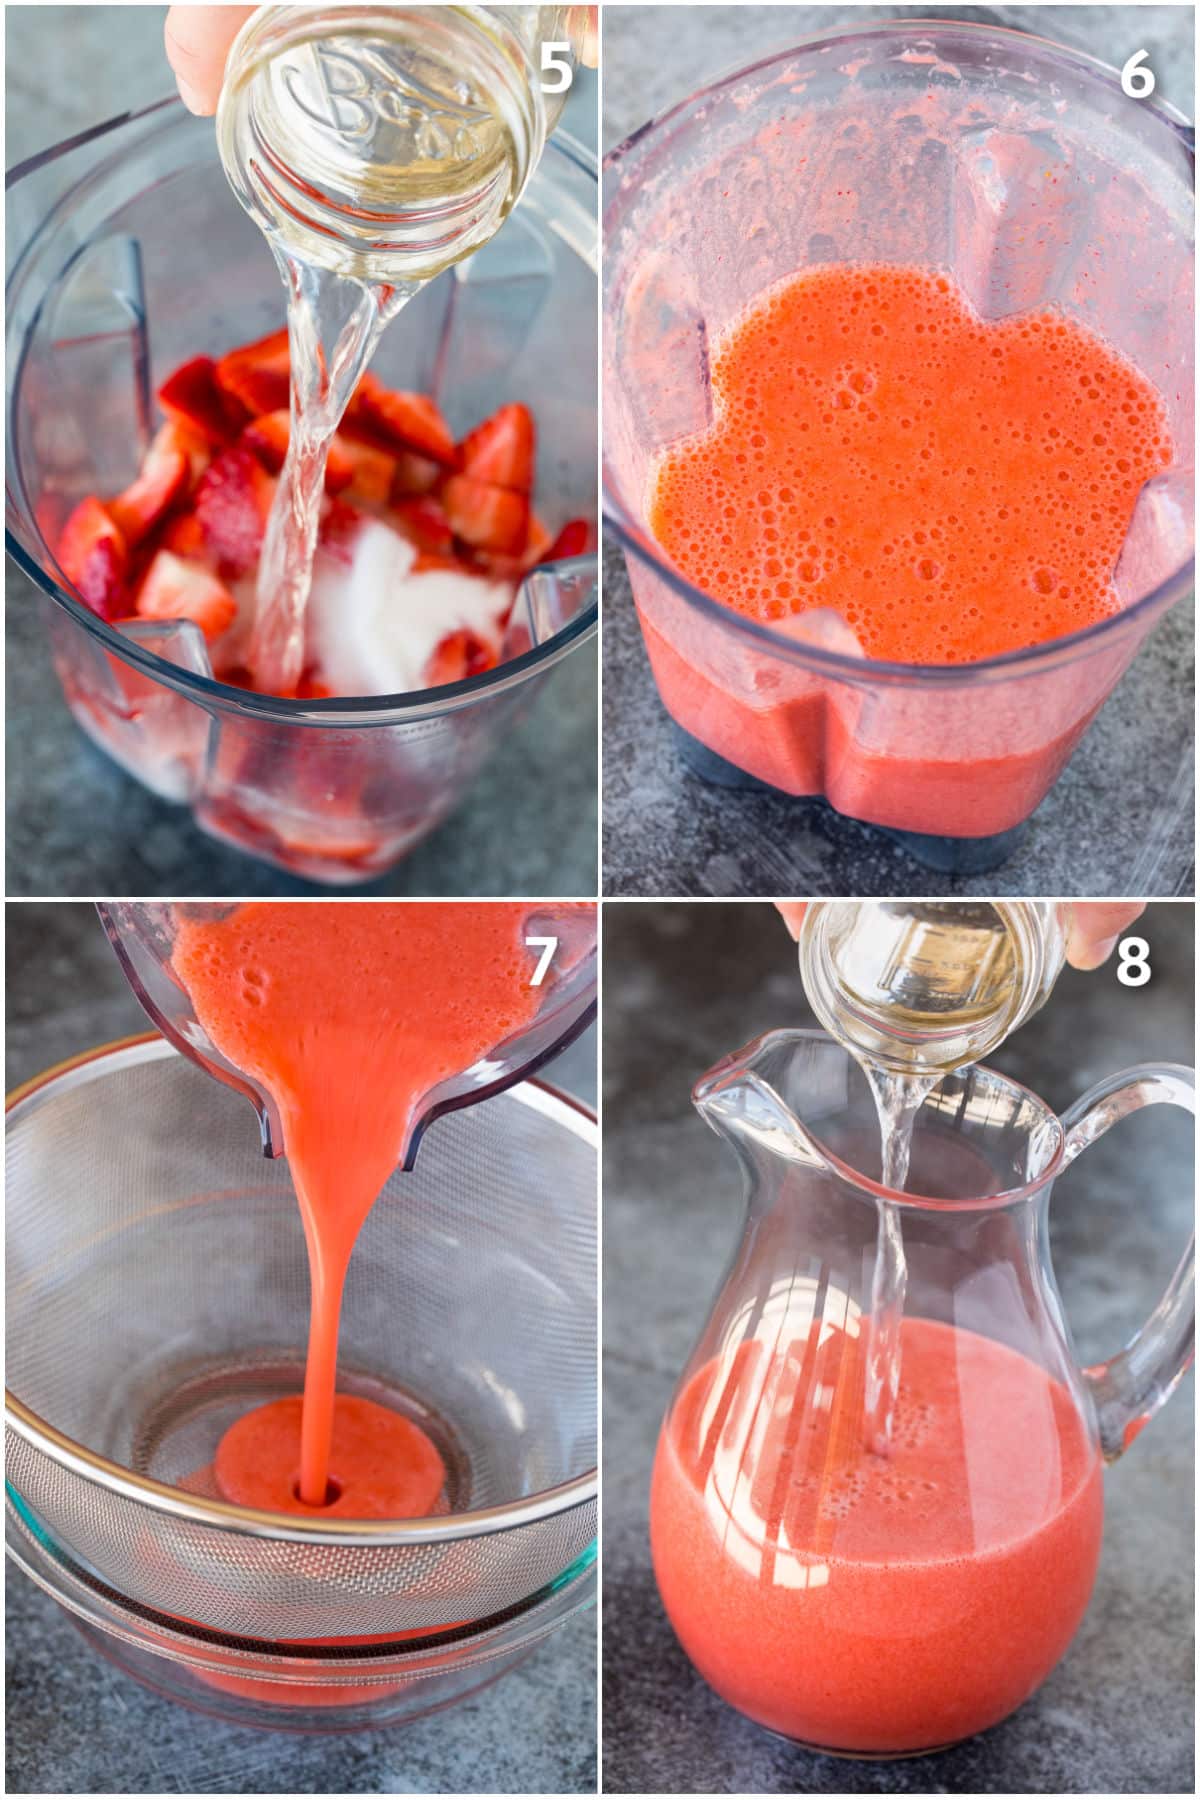 Strawberries blended and poured through a sieve then into a pitcher.